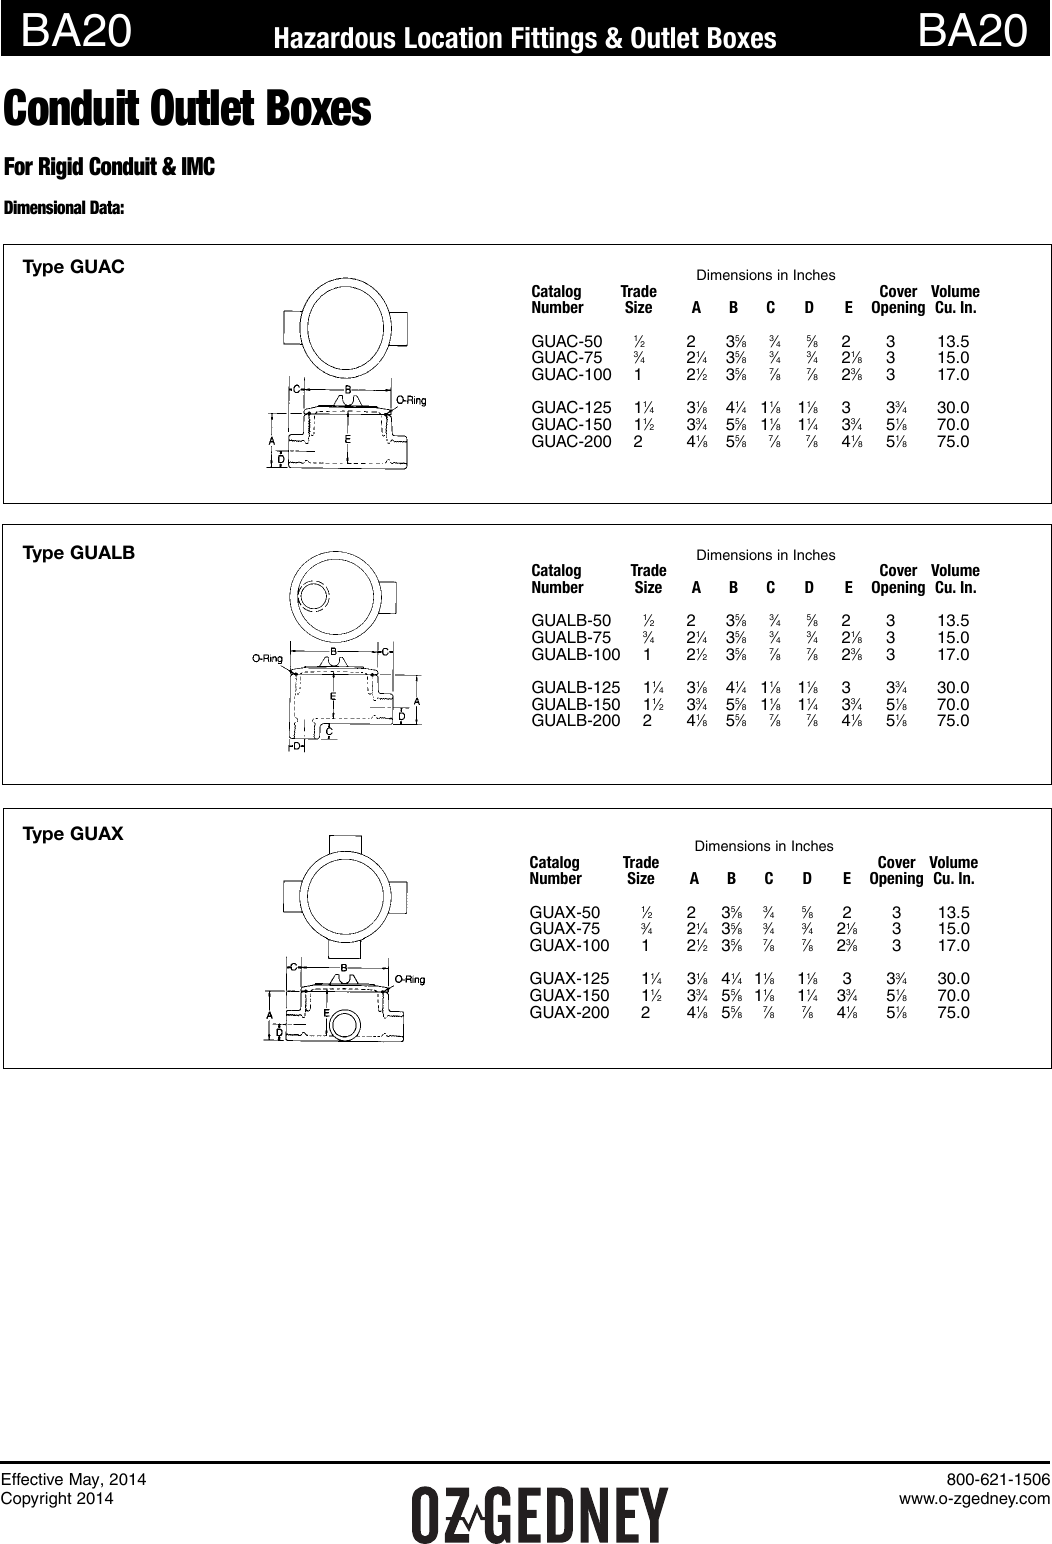 Page 3 of 7 - Type GUA Conduit Outlet Boxes Catalog Pages May 2014